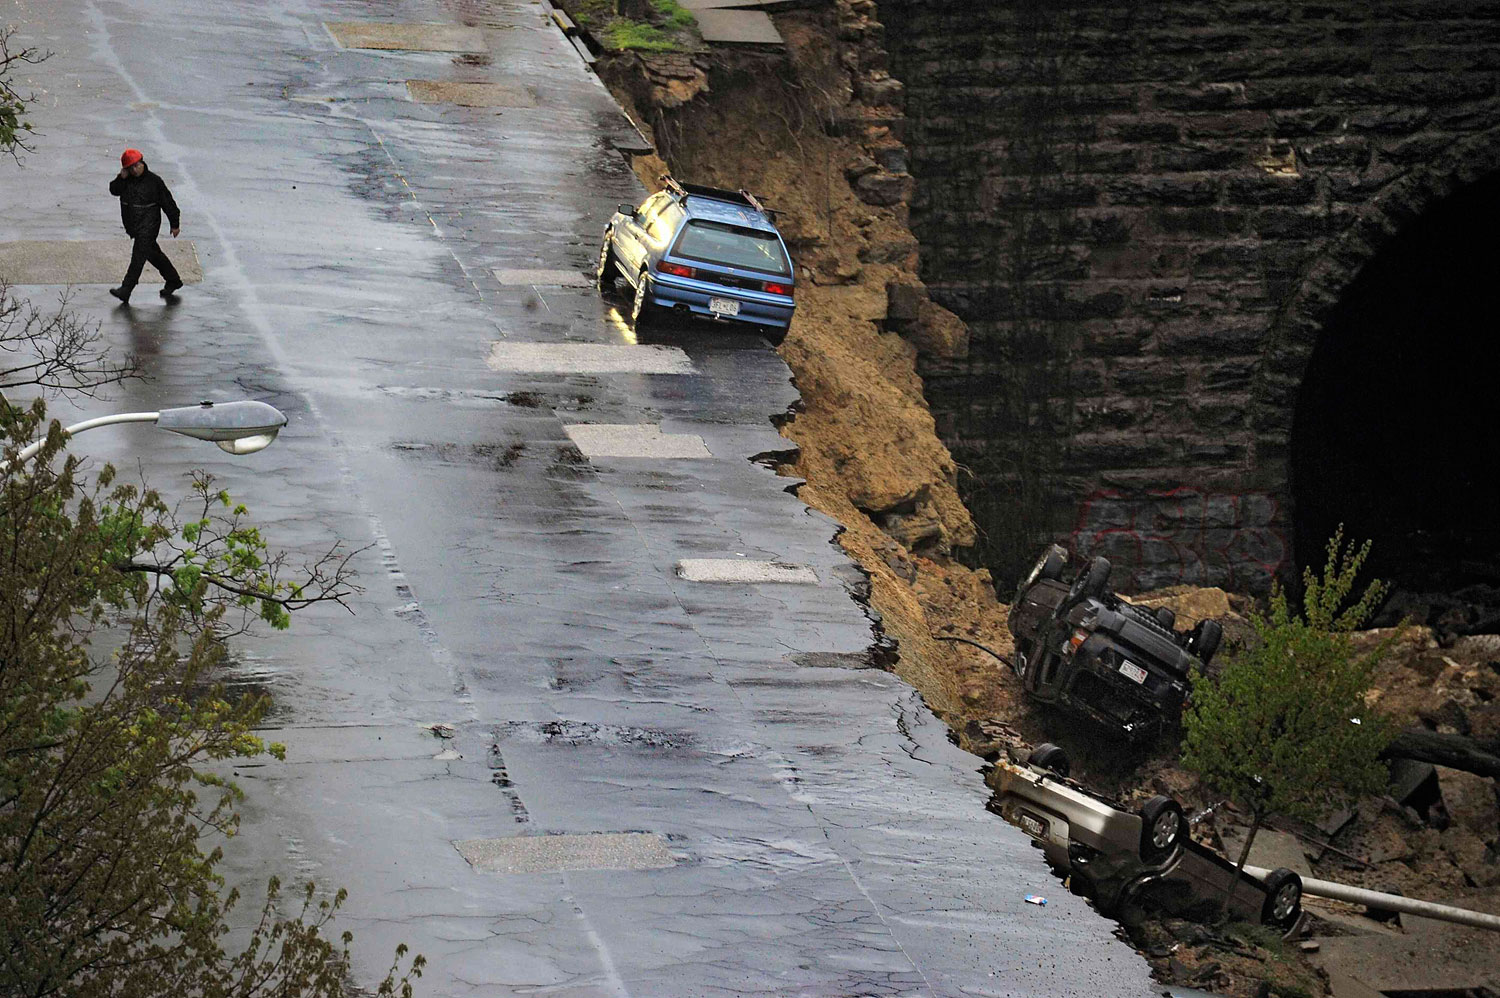 An emergency worker walks on the other side of the street where one car still rests precariously after a retaining wall collapsed beneath a row of vehicles in Baltimore, Maryland, April 30, 2014.